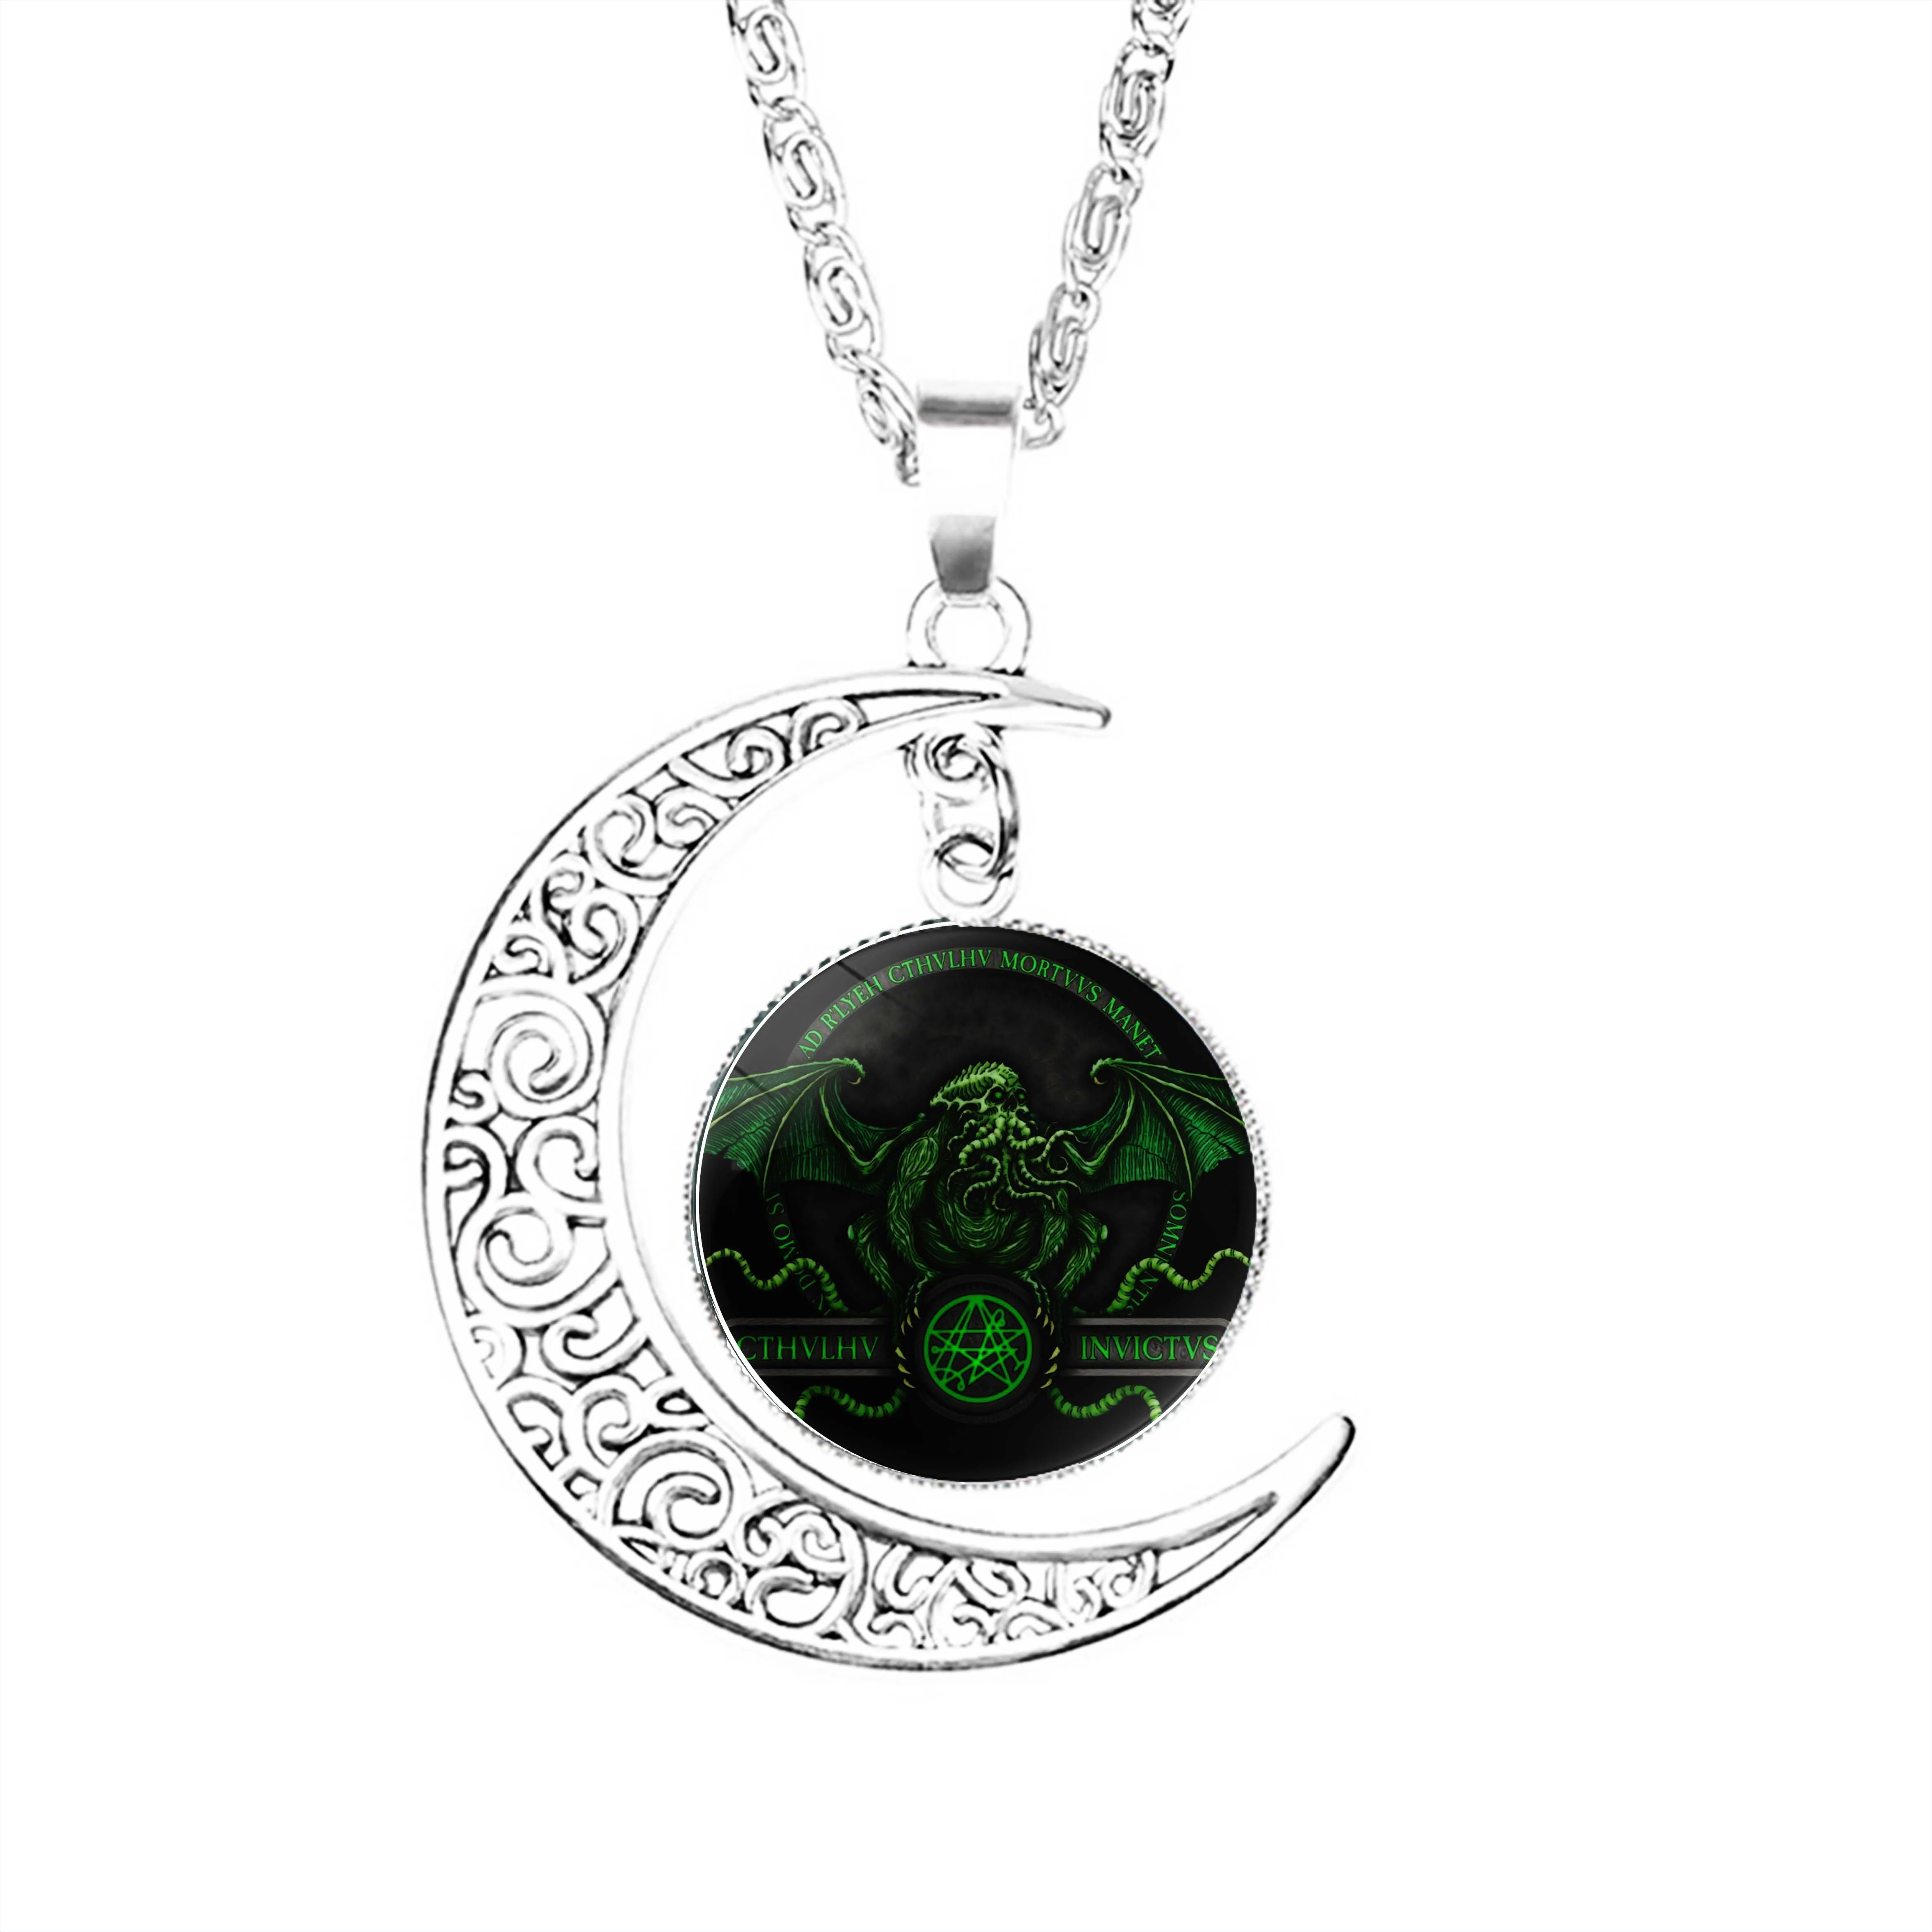 Cthulhu Invictus Azhmodai 2020  Moon Necklace Gifts Accessories Party Fashion Jewelry Charm Stainless Steel Men Lady Women Glass